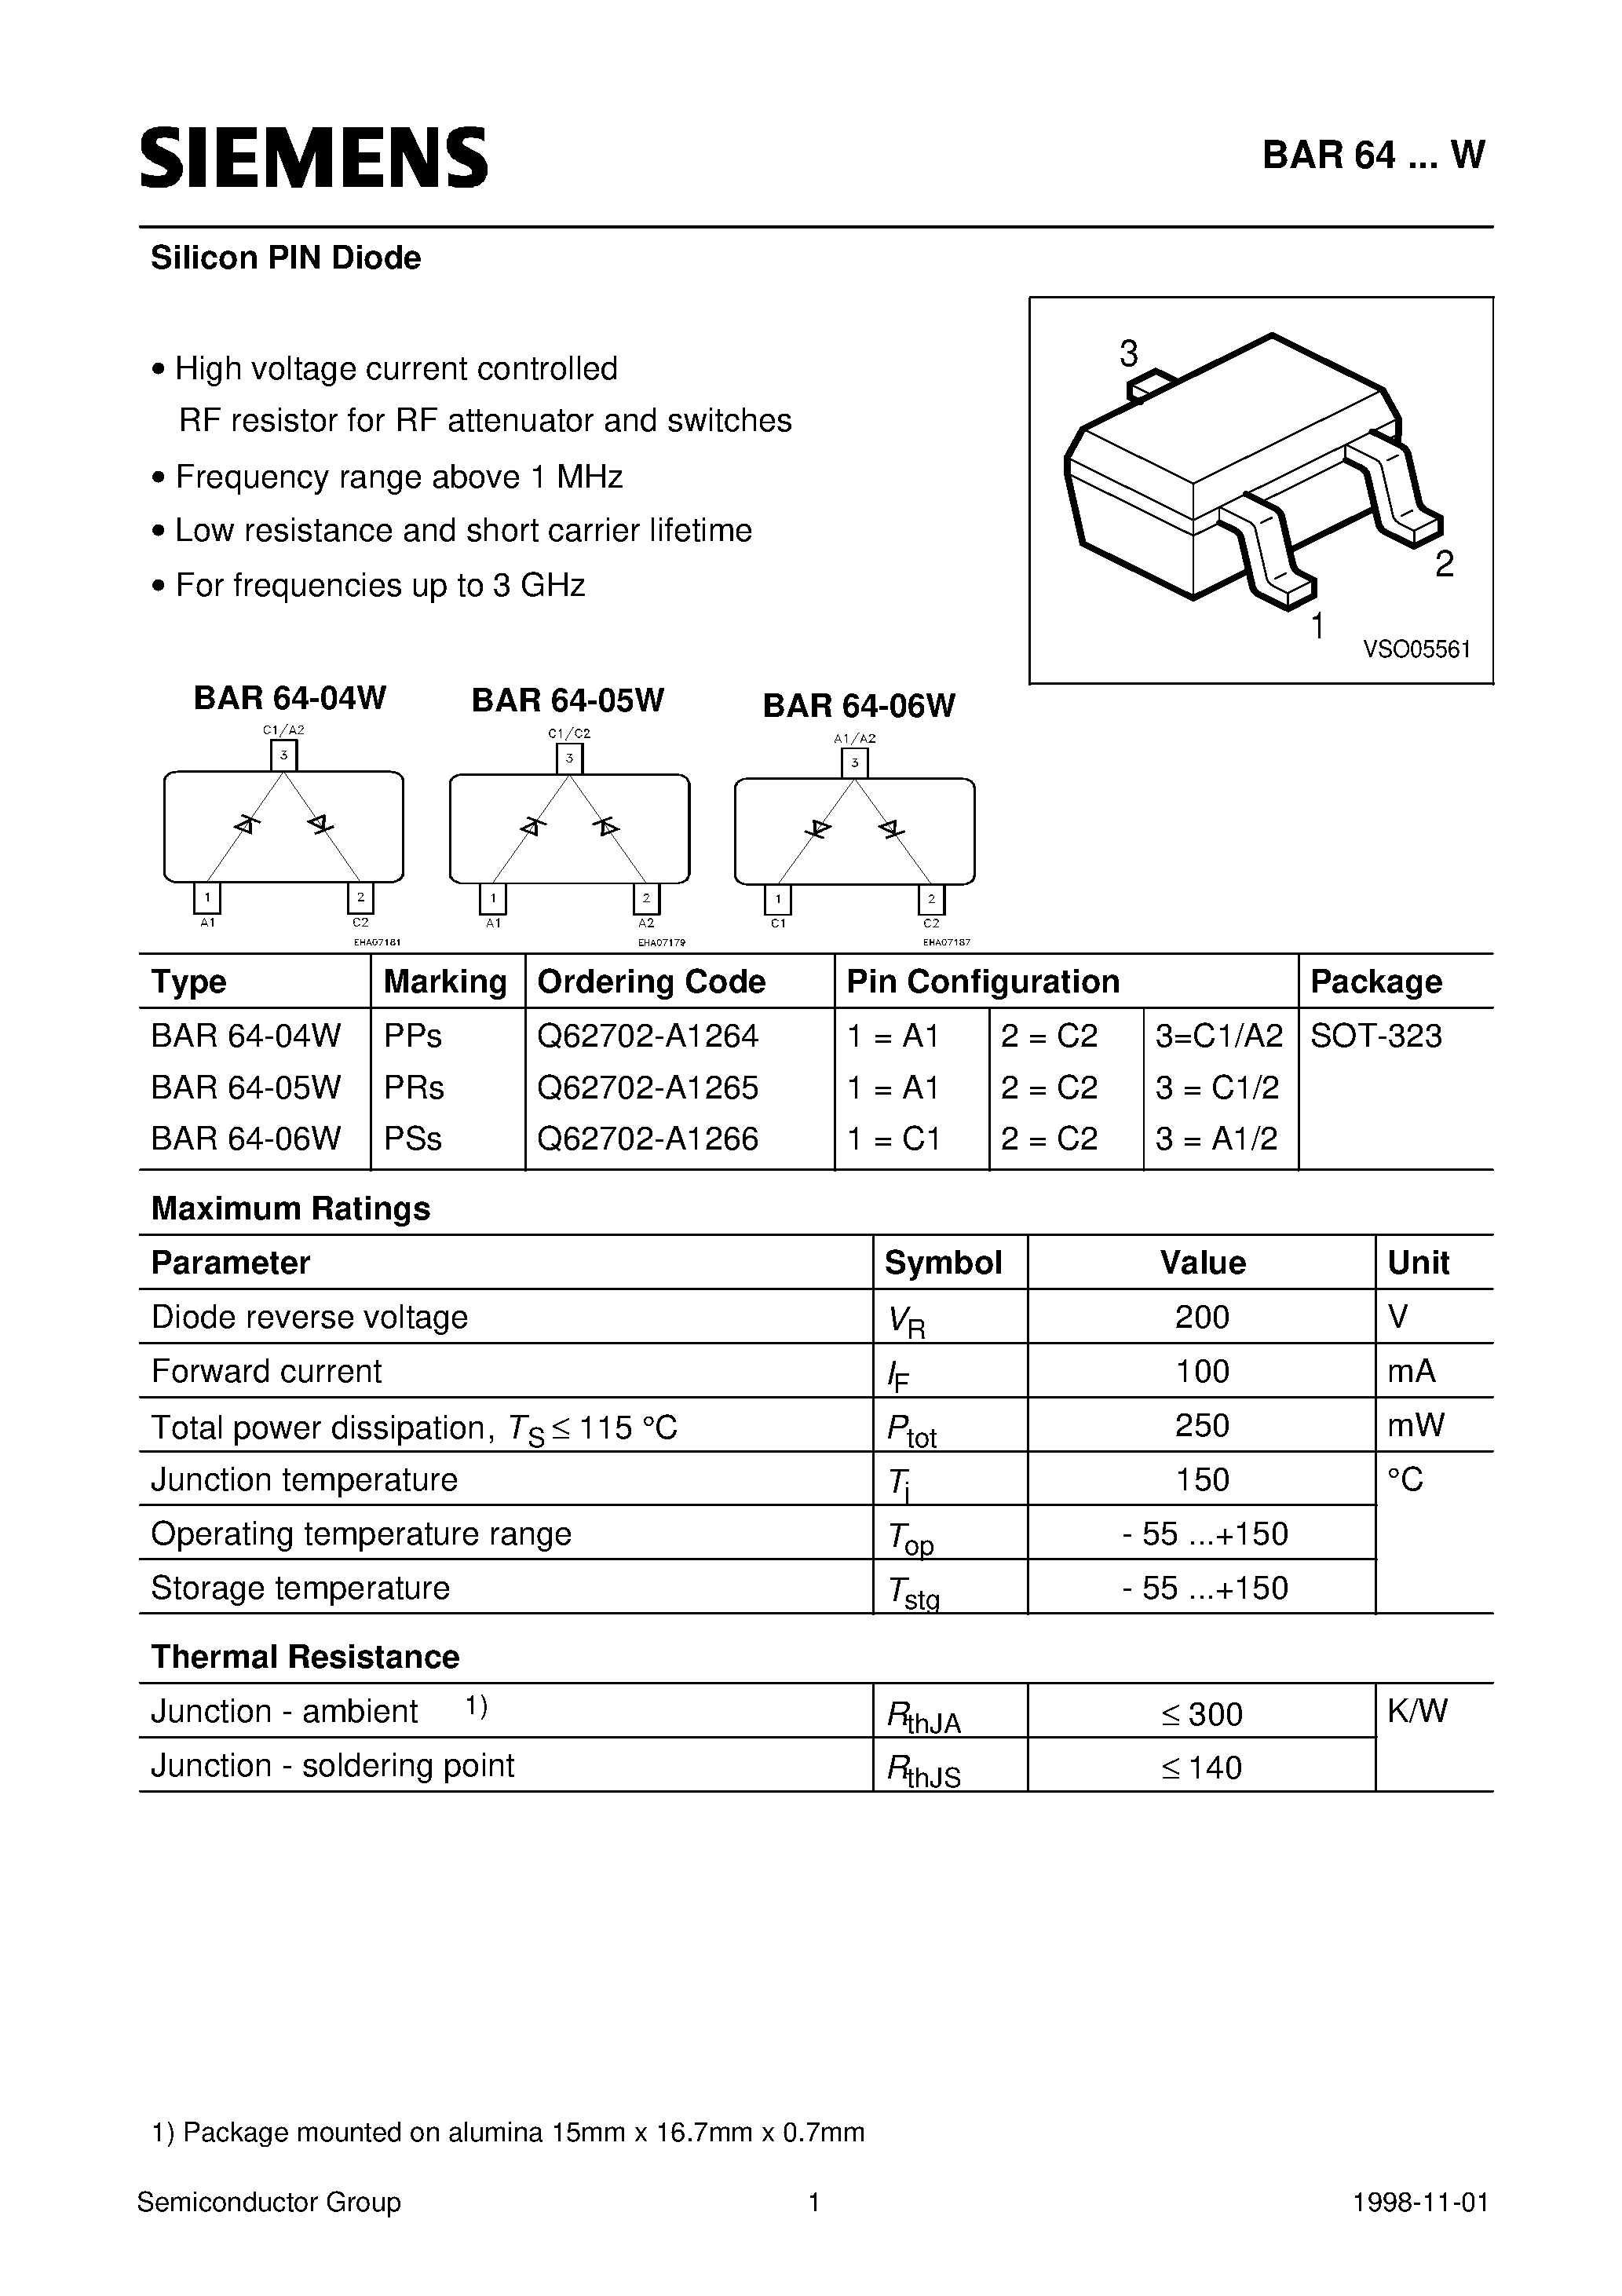 Даташит BAR64-W - Silicon PIN Diode (High voltage current controlled RF resistor for RF attenuator and switches Frequency range above 1 MHz) страница 1